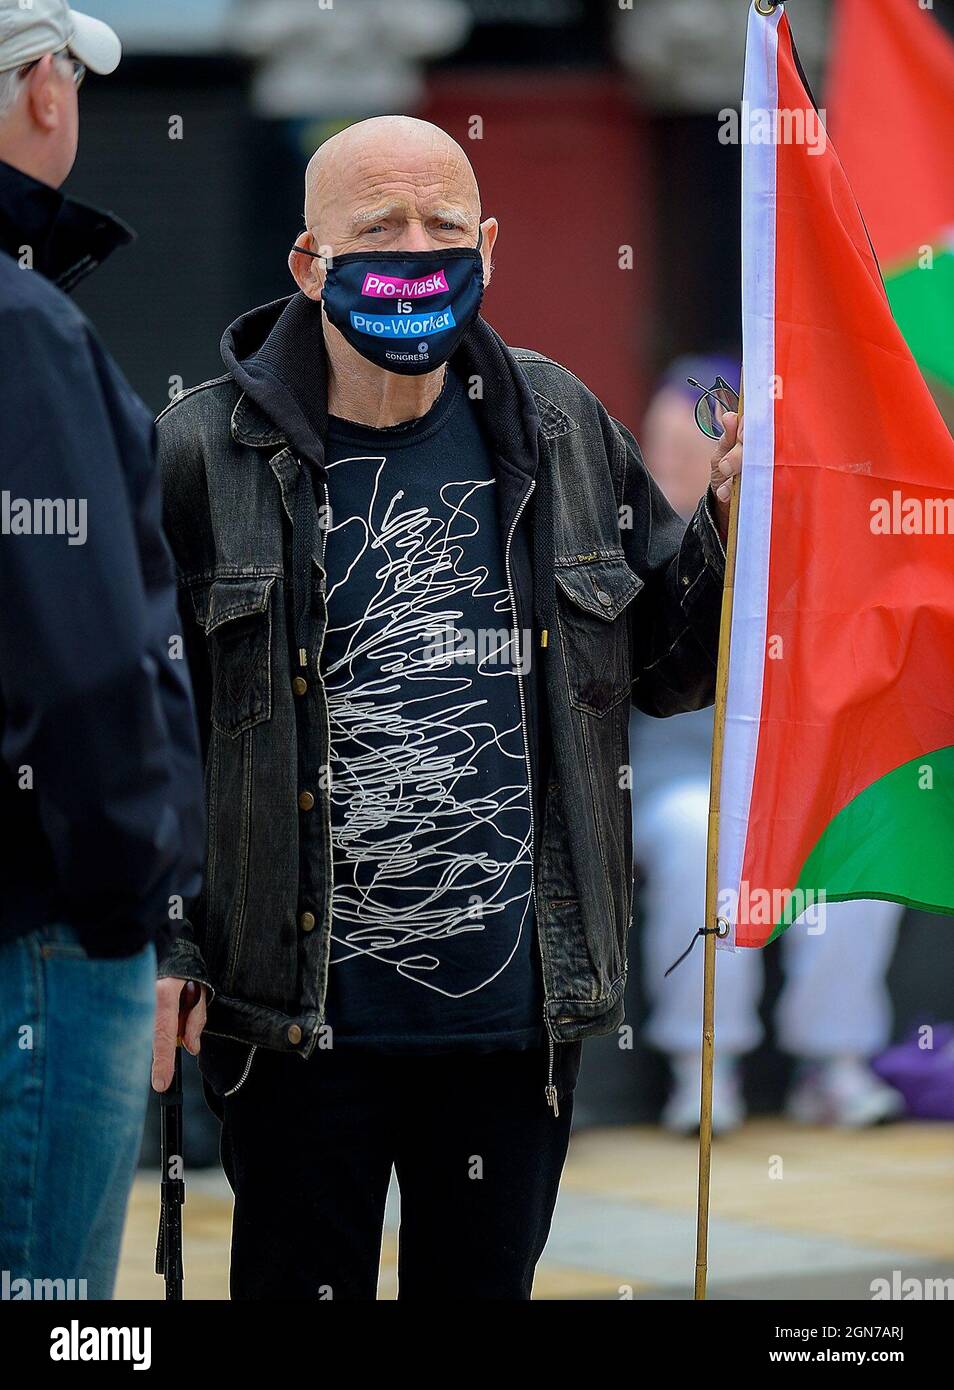 Eamonn McCann, veteran civil rights activist and campaigner pictured at a Palestinian Solidarity rally in Derry, Northern Ireland. May 2021. ©George Sweeney / Alamy Stock Photo Stock Photo